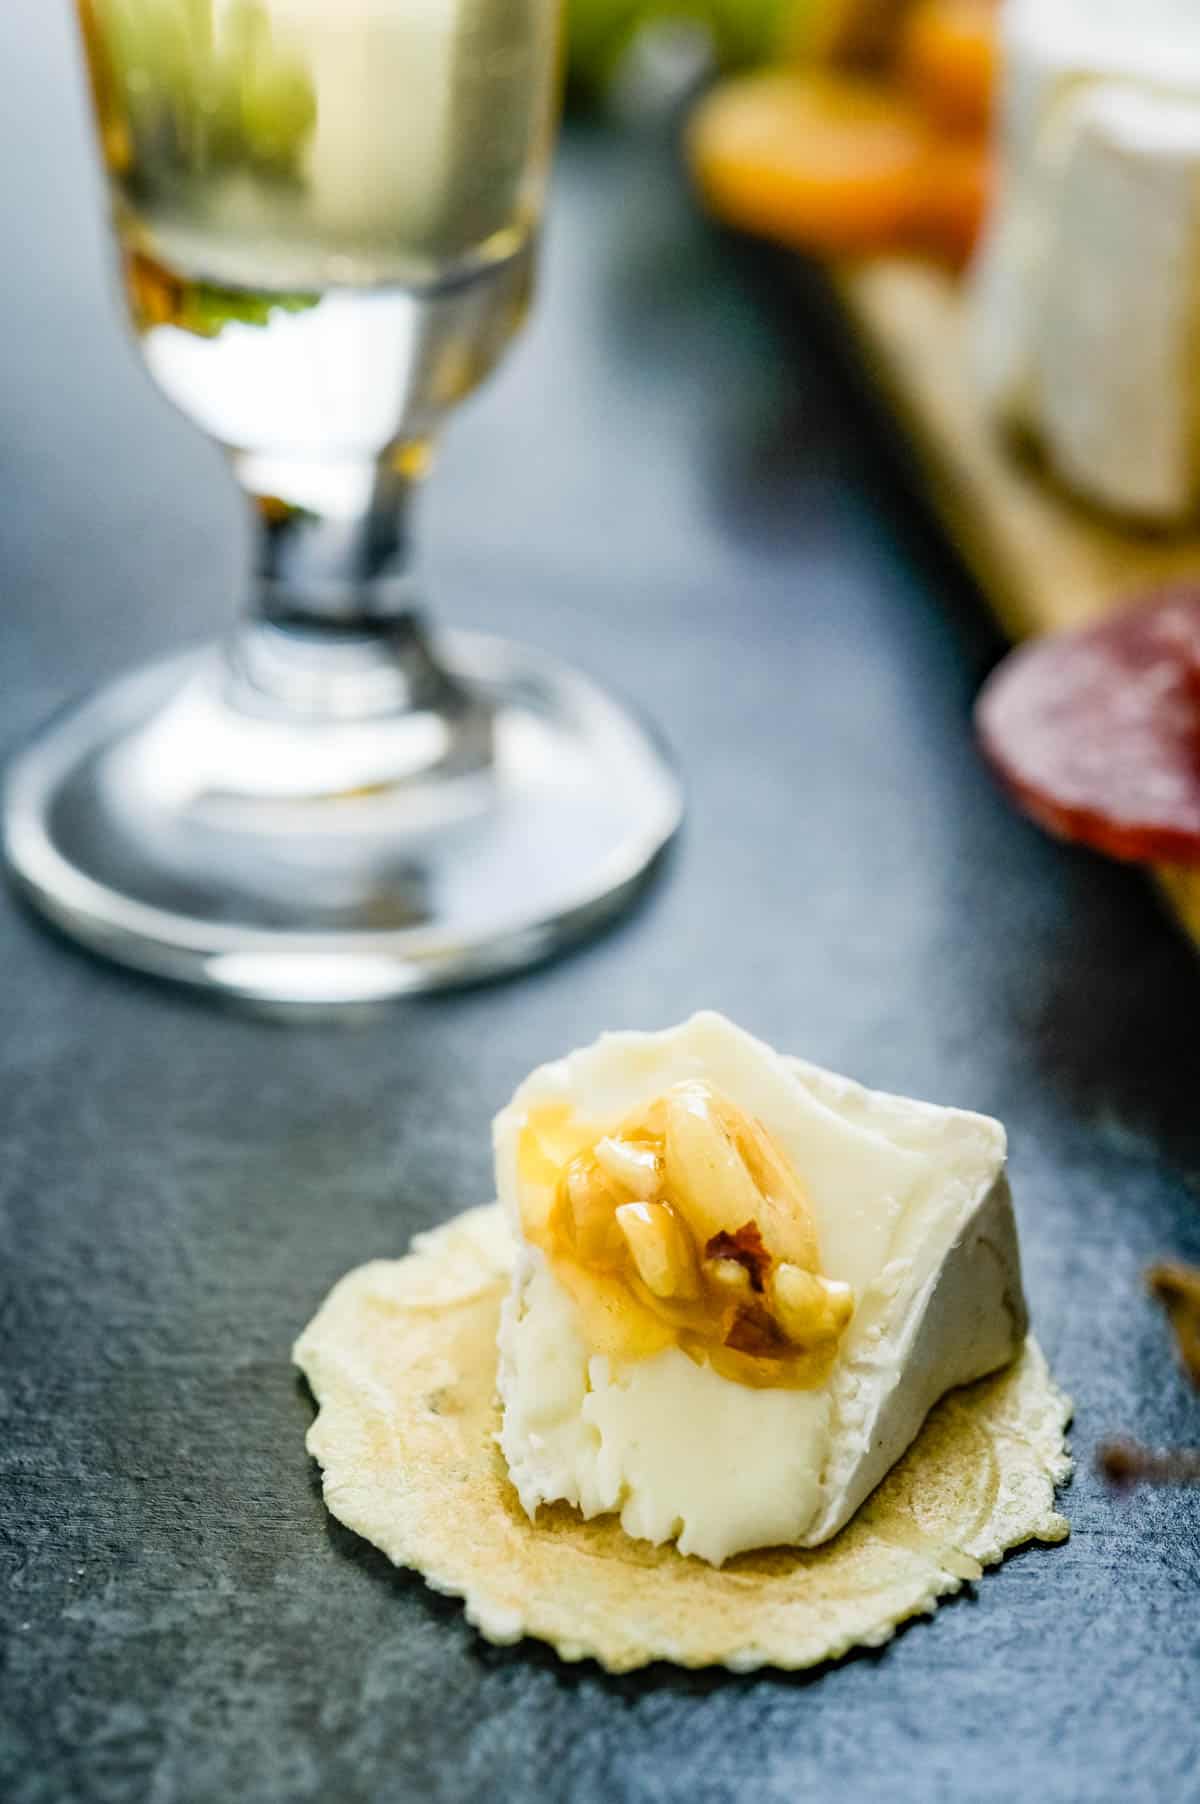 Cheese and crackers next to a glass of wine.